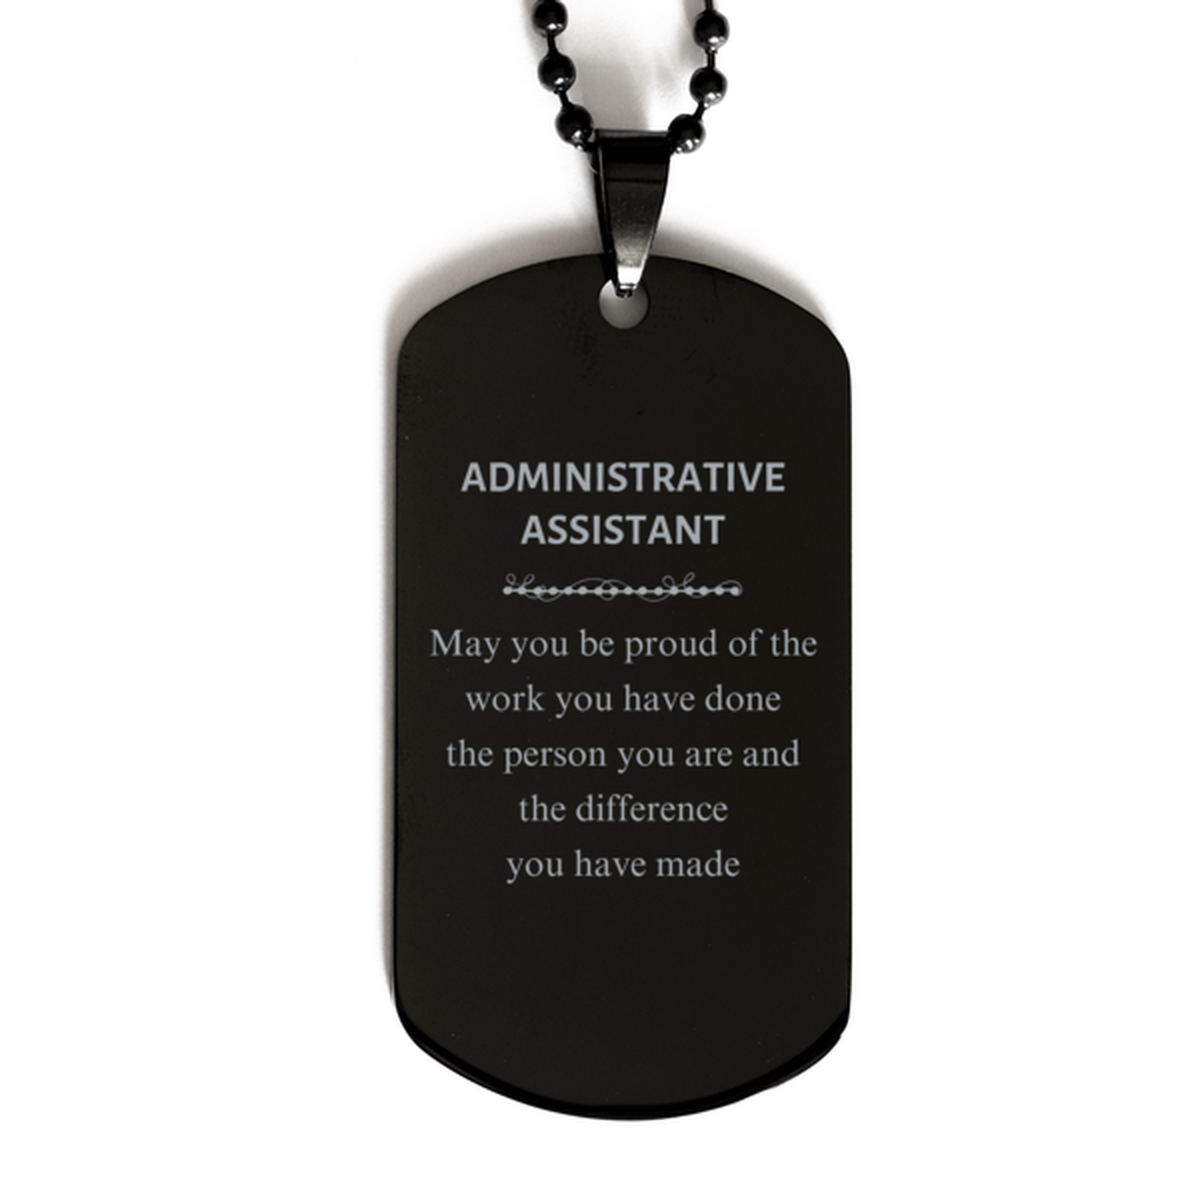 Administrative Assistant May you be proud of the work you have done, Retirement Administrative Assistant Black Dog Tag for Colleague Appreciation Gifts Amazing for Administrative Assistant